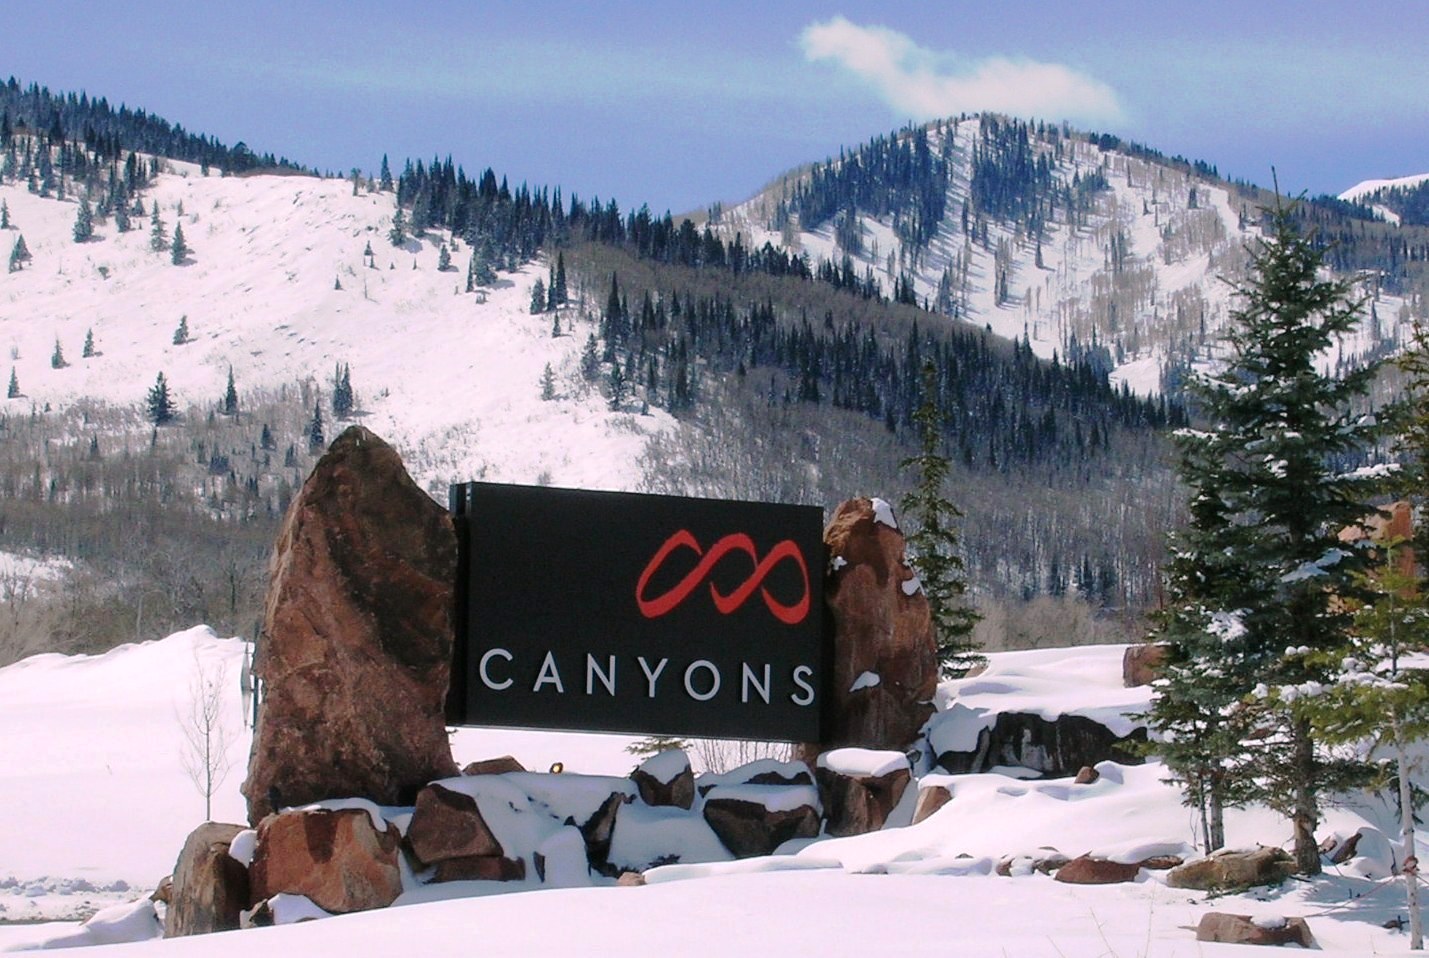 Canyons sign